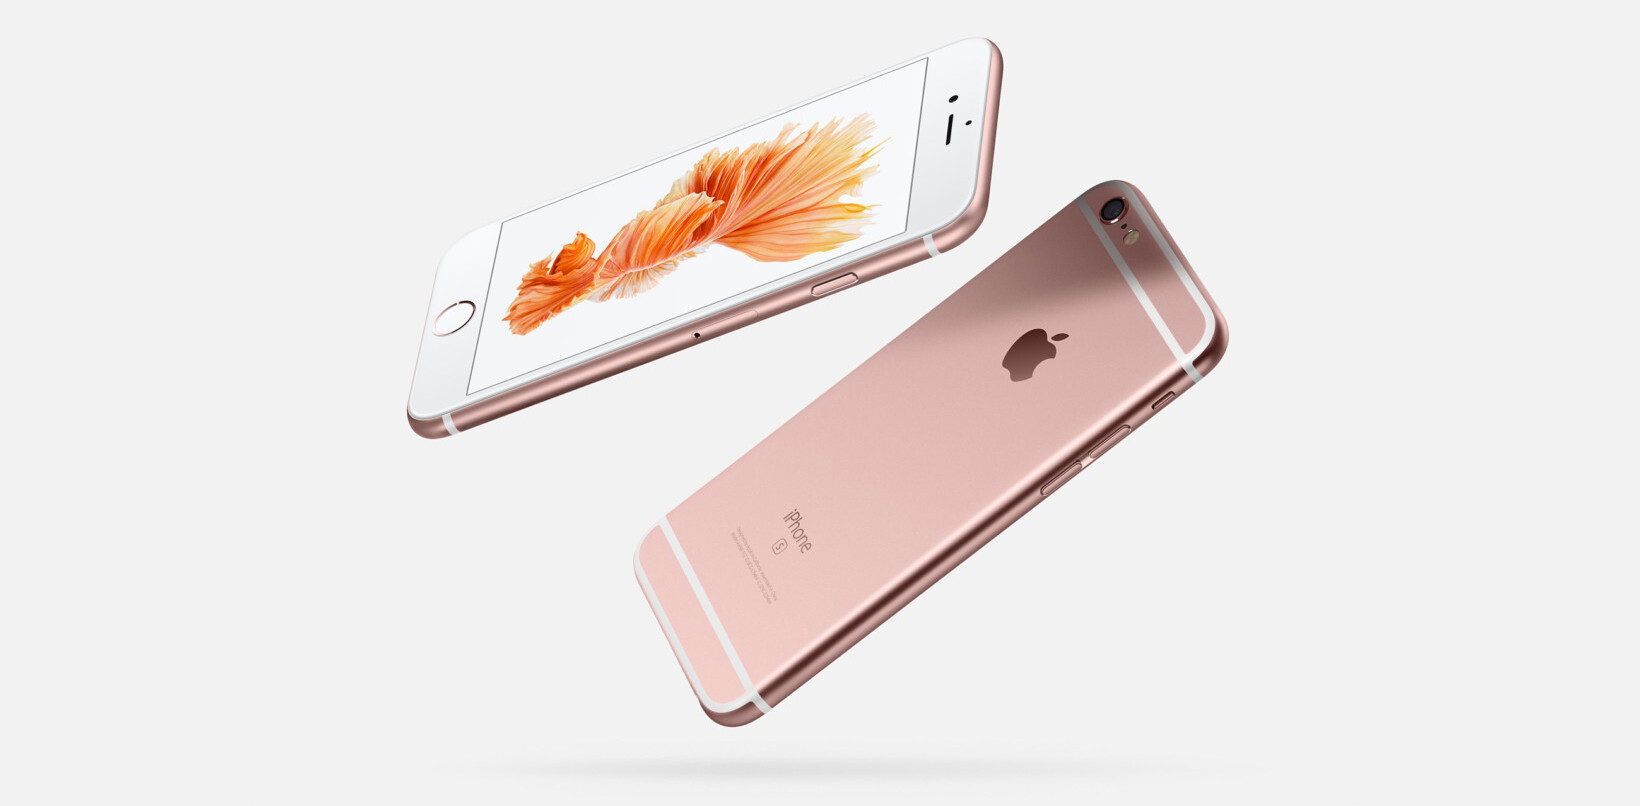 Apple to reportedly extend its iPhone 6s battery replacement program to iPhone 6… or not [UPDATED]